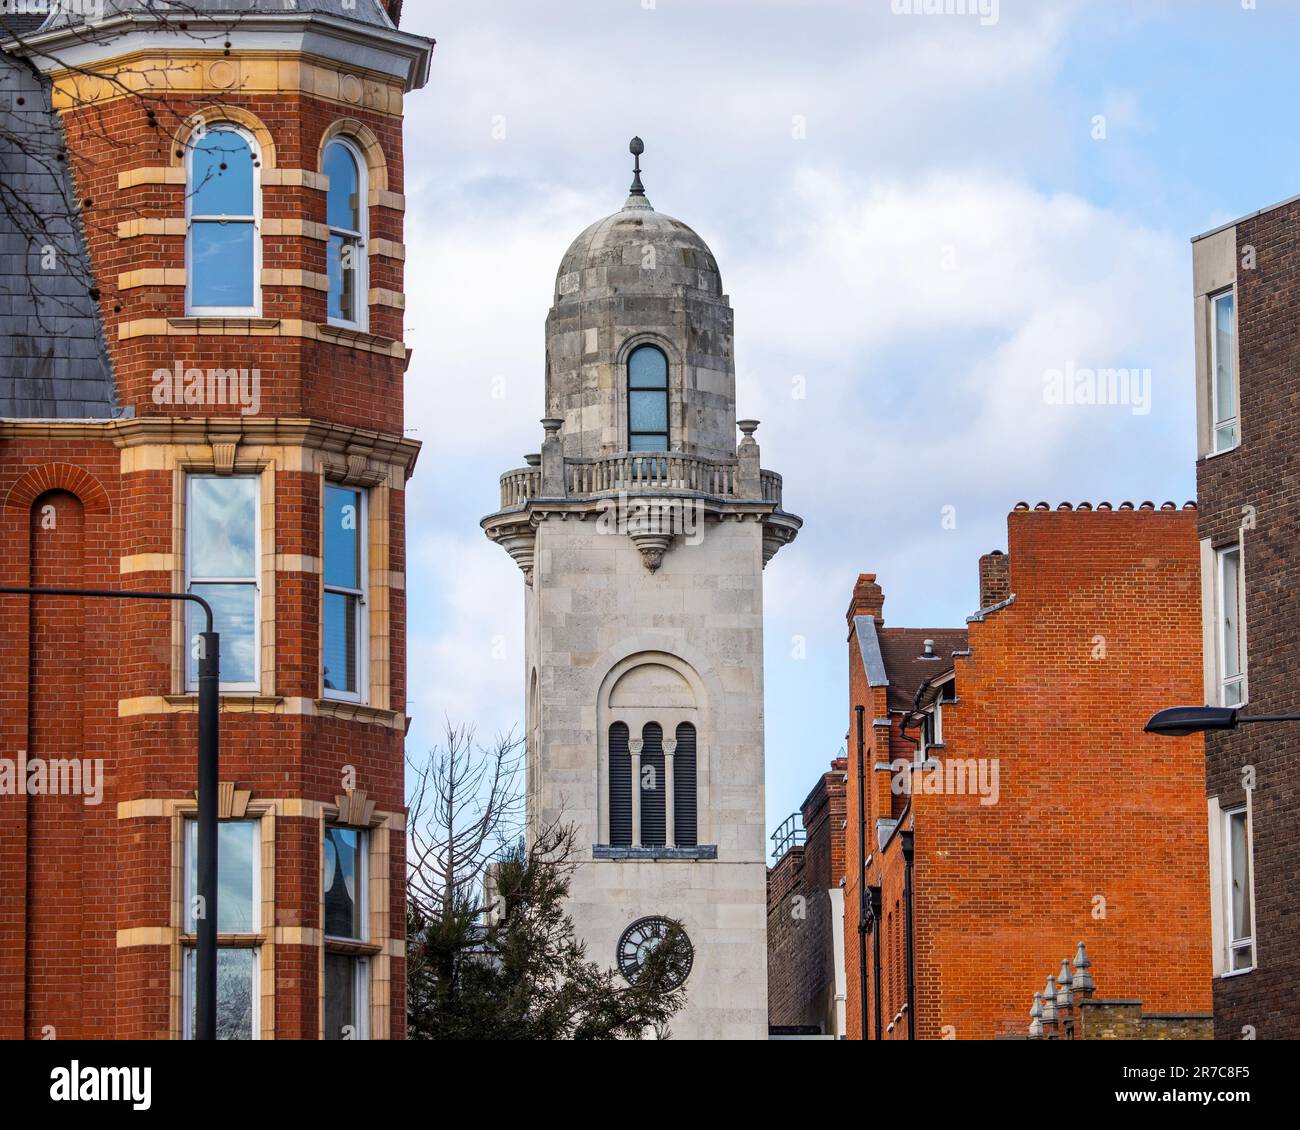 The tower of Cadogan Hall, viewed from Sloane Square in the Chelsea area of London, UK. Stock Photo